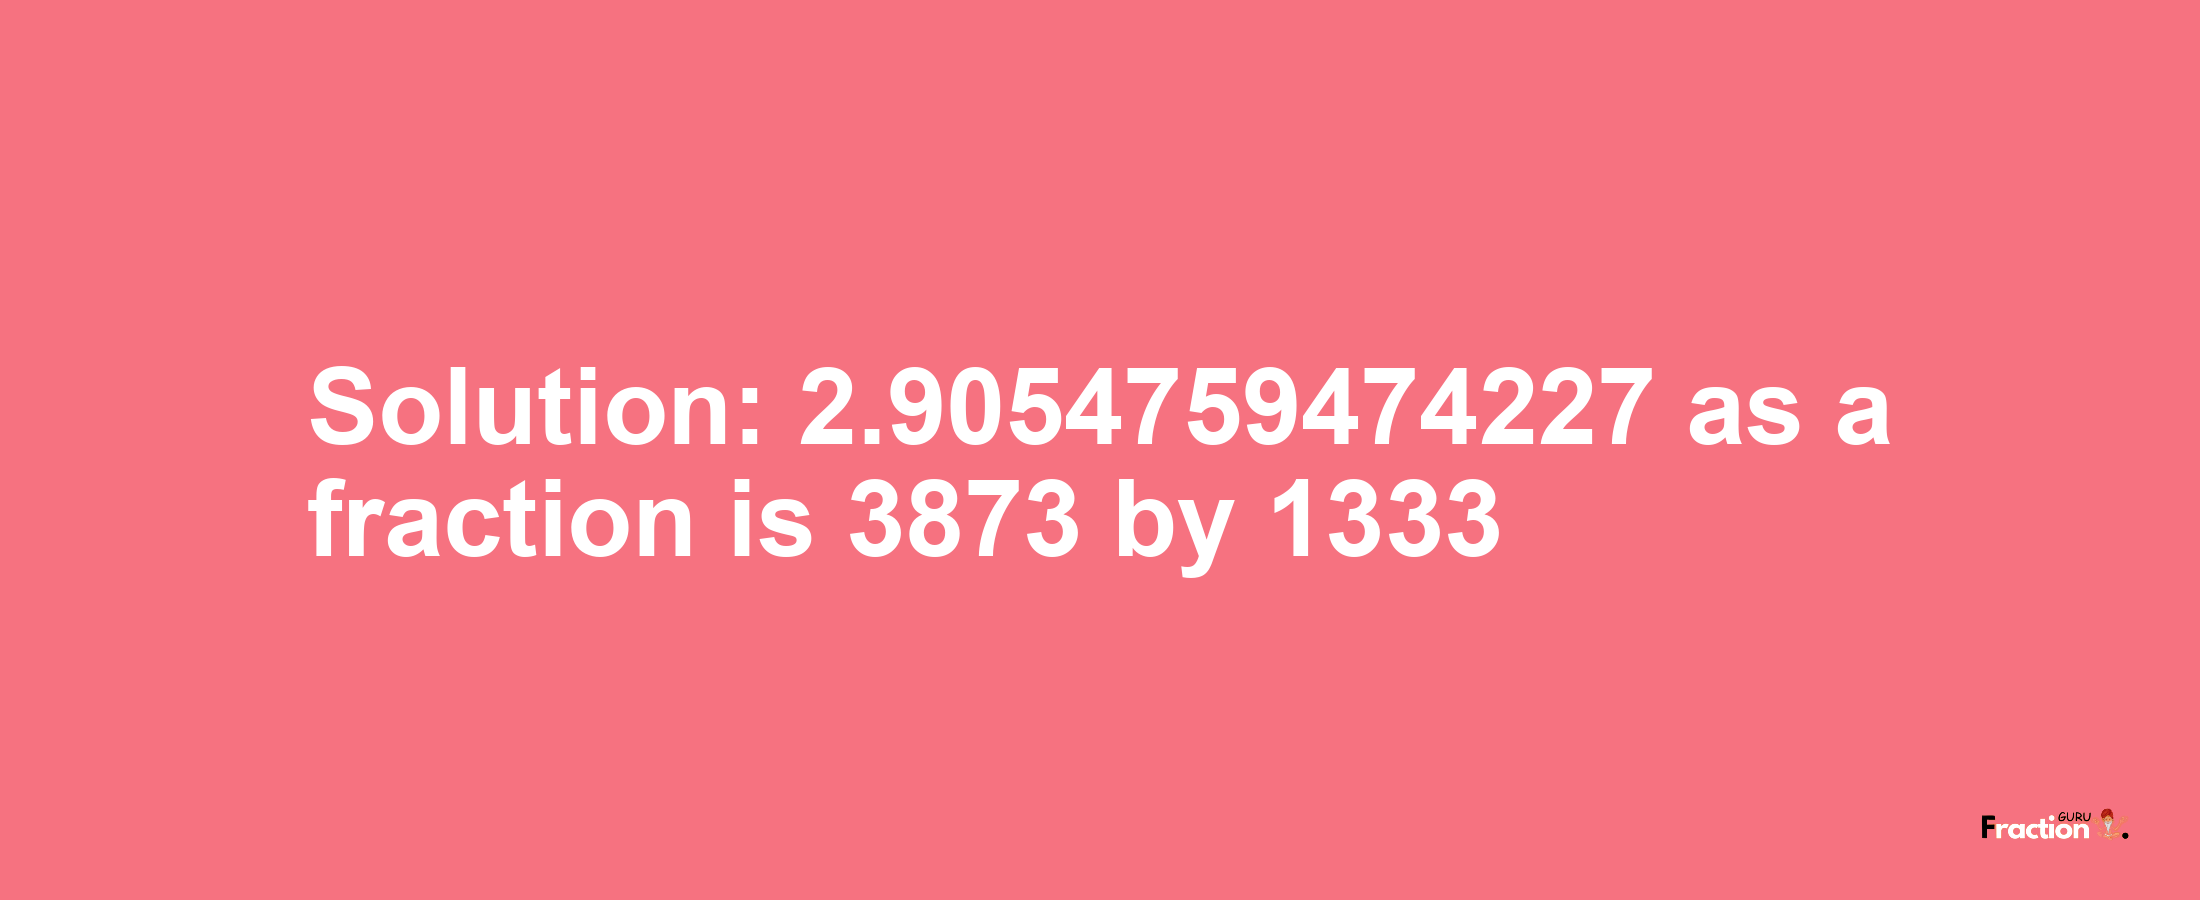 Solution:2.9054759474227 as a fraction is 3873/1333